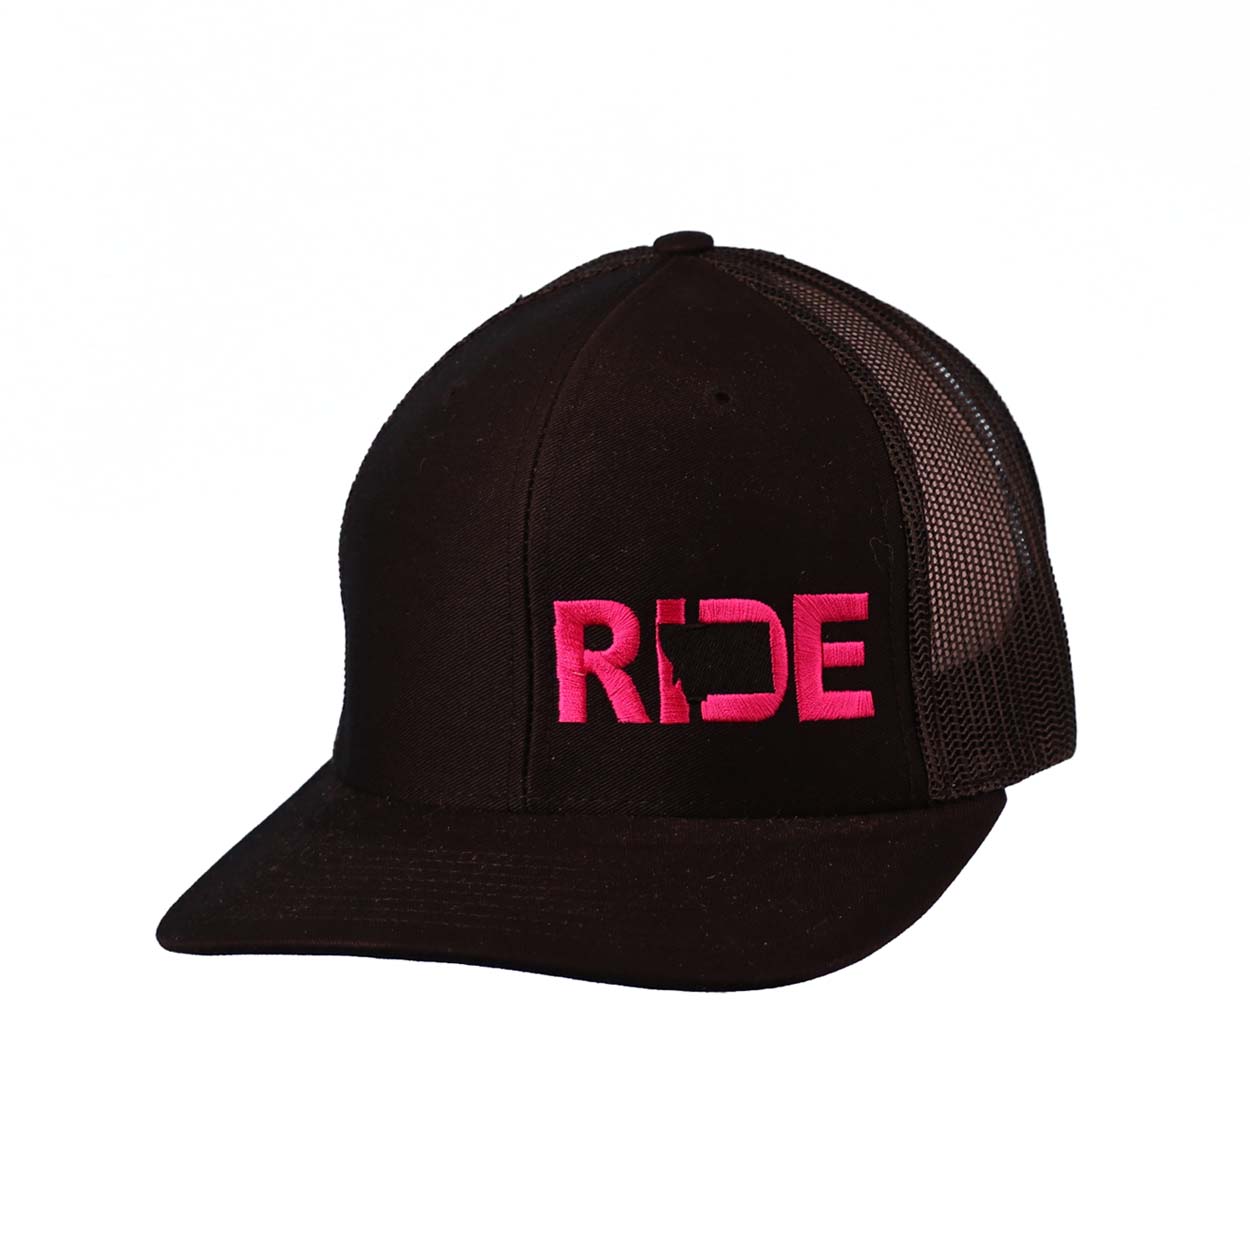 Ride Montana Night Out Embroidered Snapback Trucker Hat Black/Pink